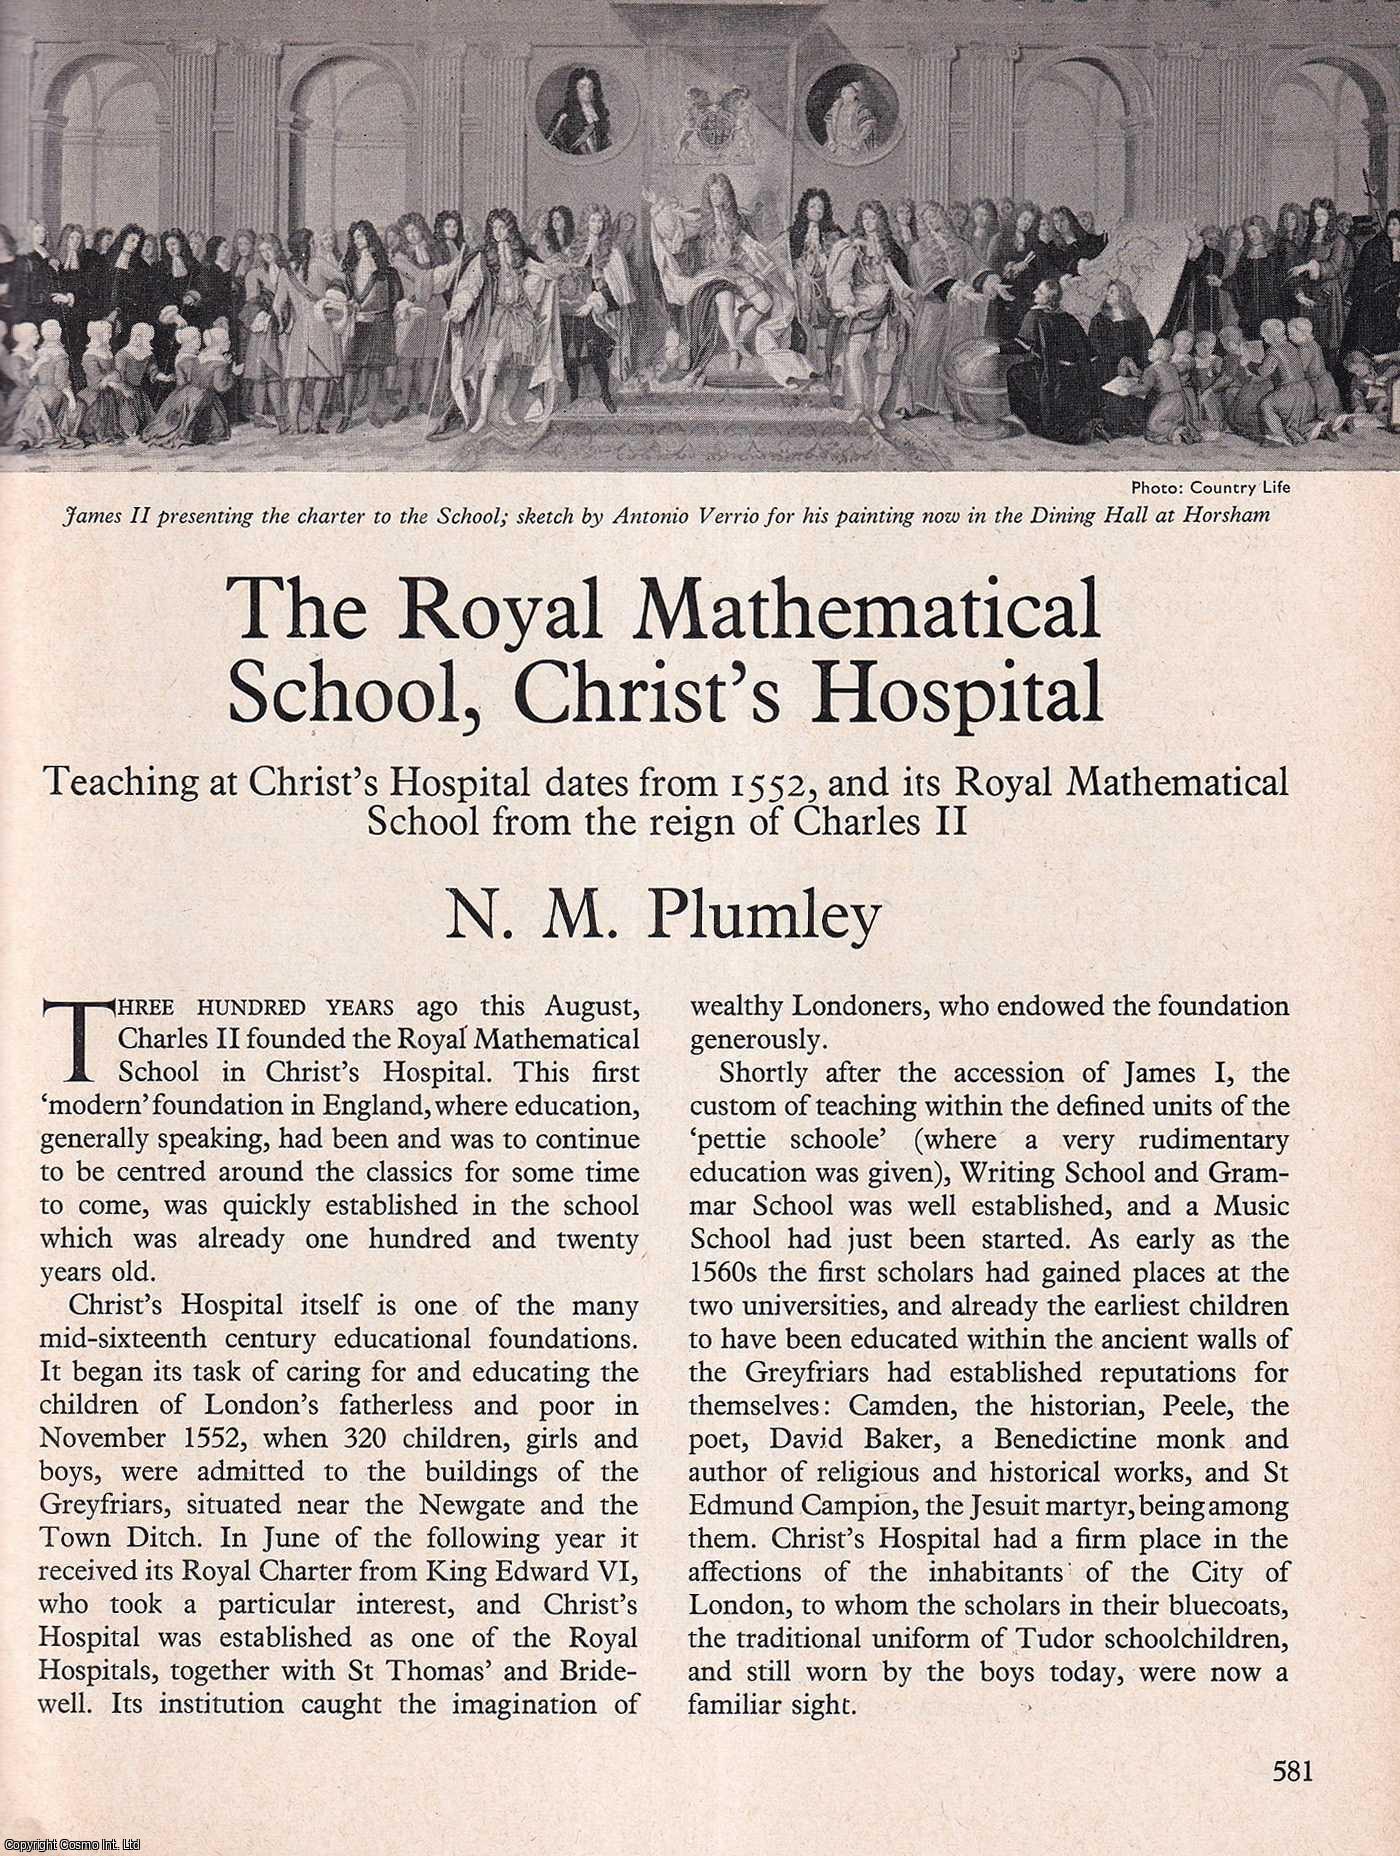 N.M. Plumley - The Royal Mathematical School, Christ's Hospital. An original article from History Today magazine, 1973.